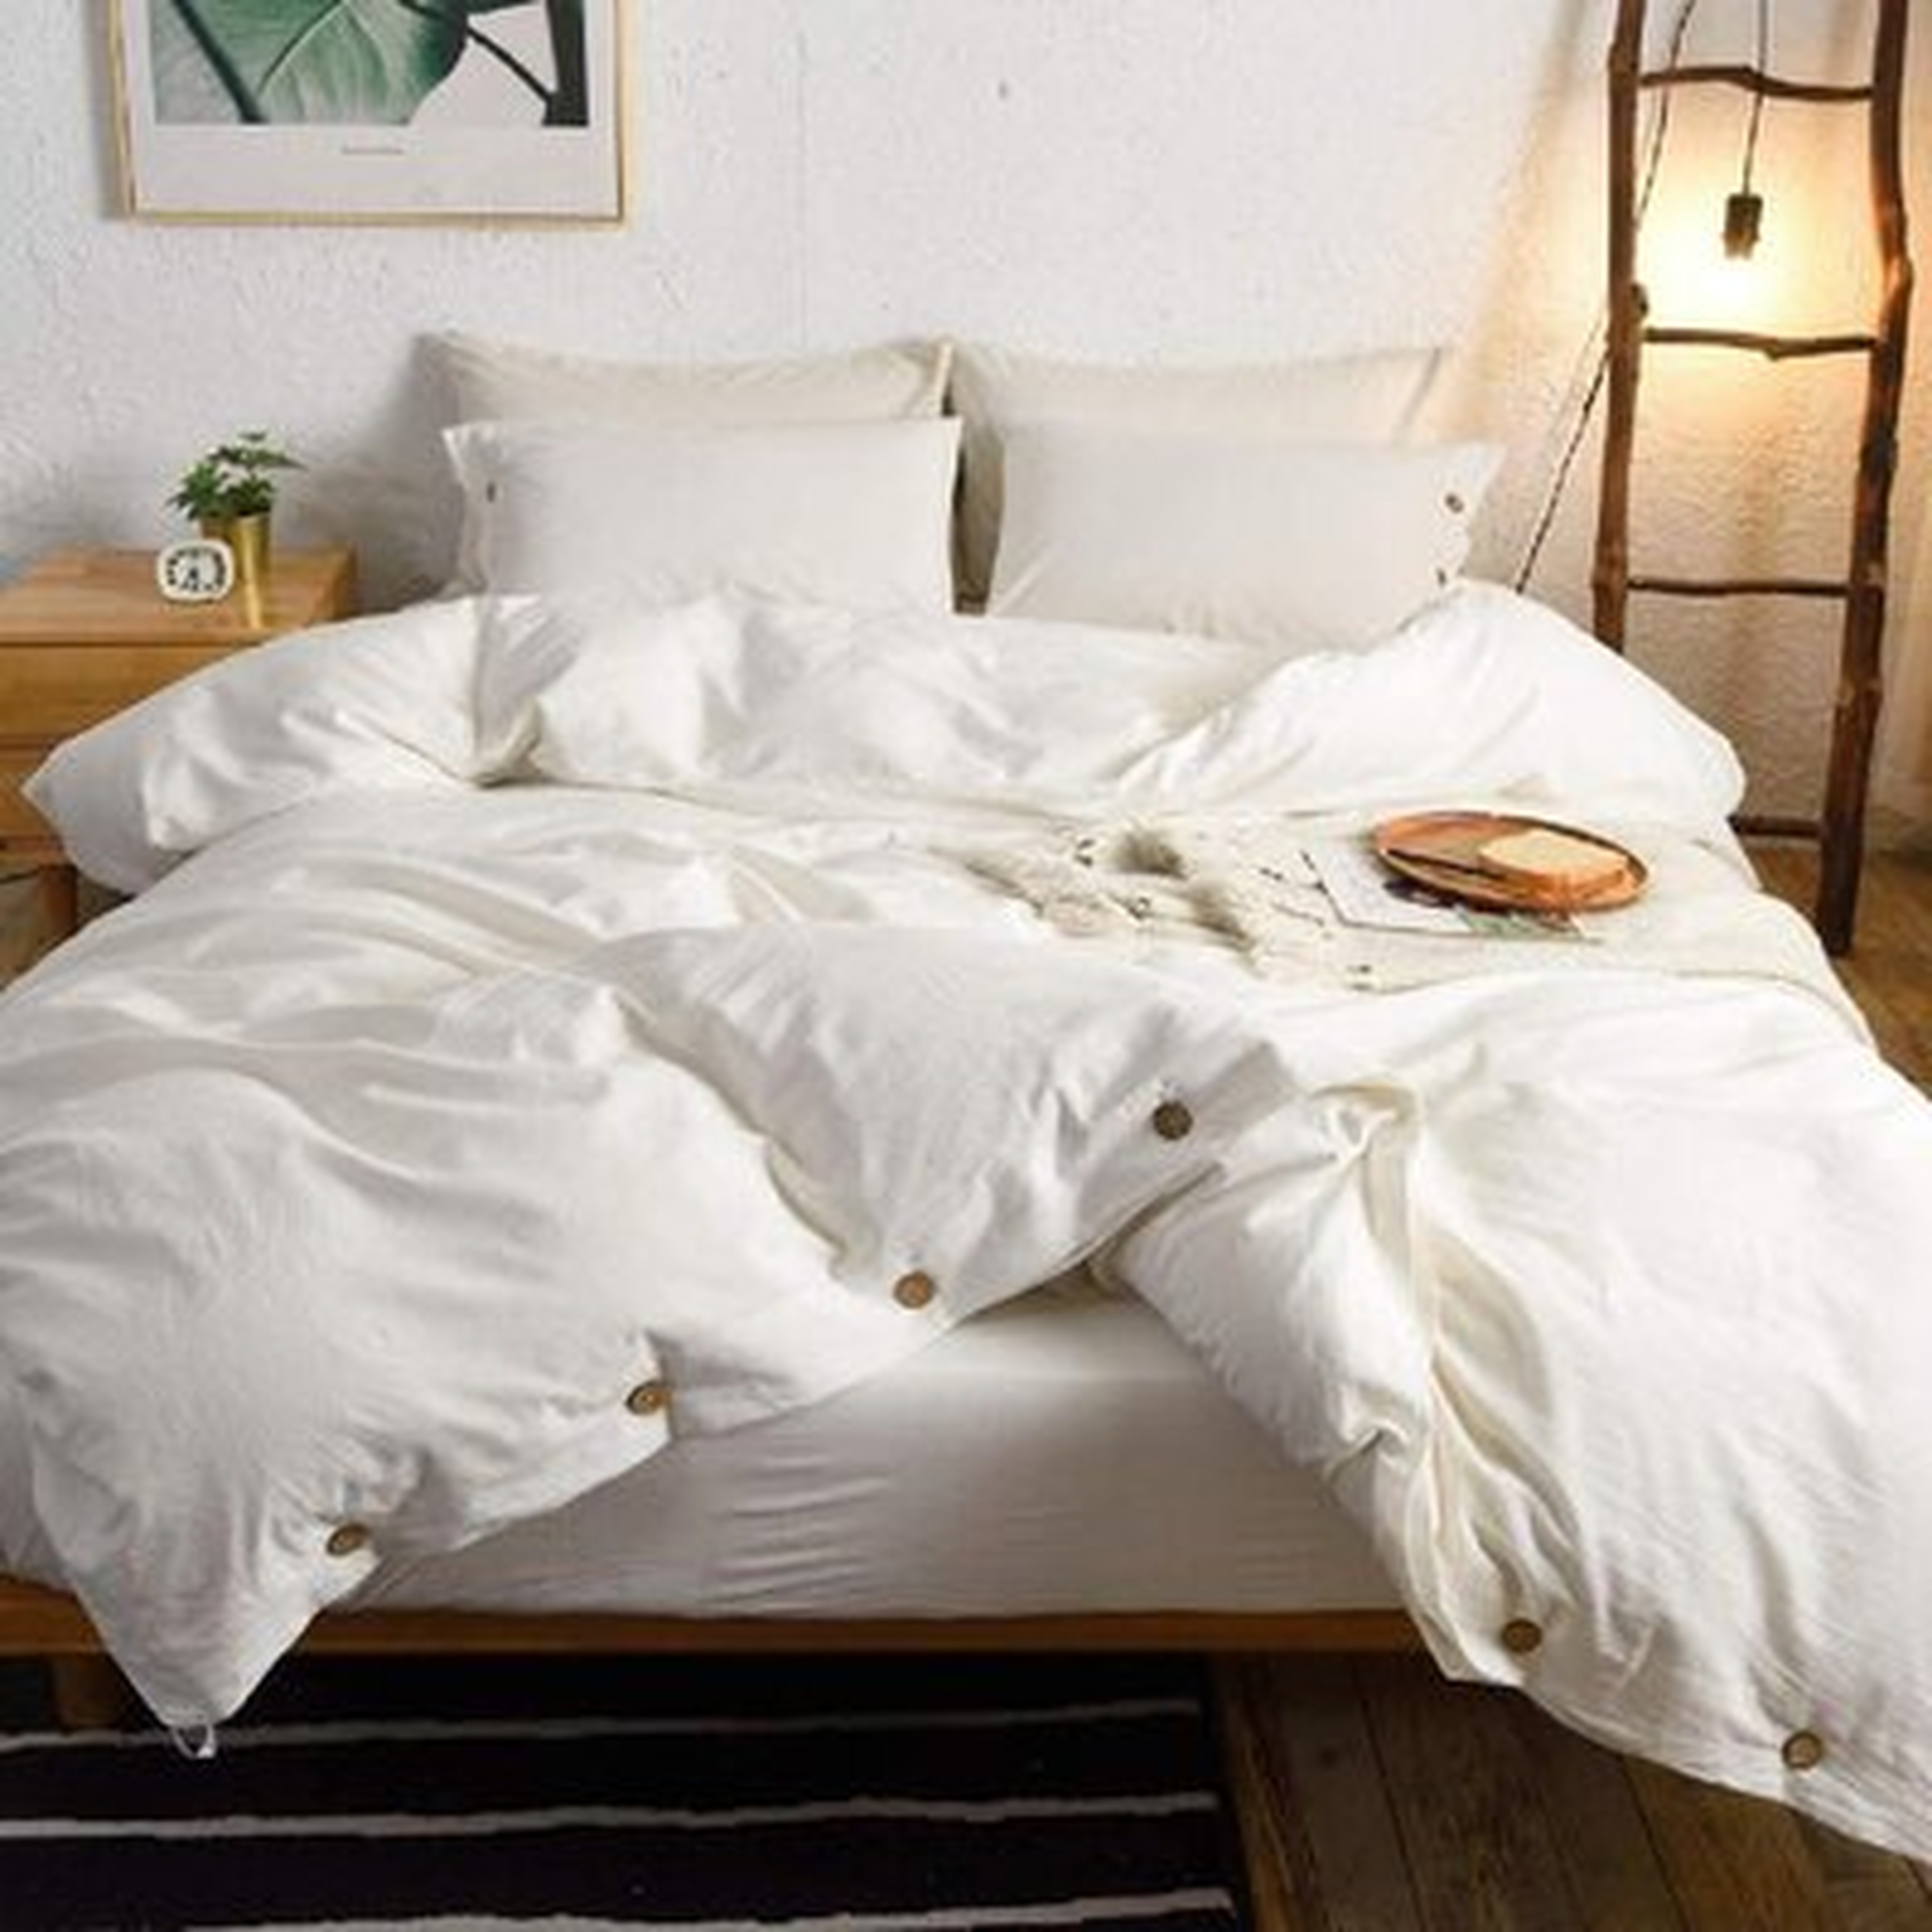 3 Pieces White Duvet Cover King,100% Washed Cotton Duvet Cover With Button Closure,Ultra Soft Natural Cotton Bedding Set-King Size(1 Duvet Cover 2 Pillowcases) - Wayfair